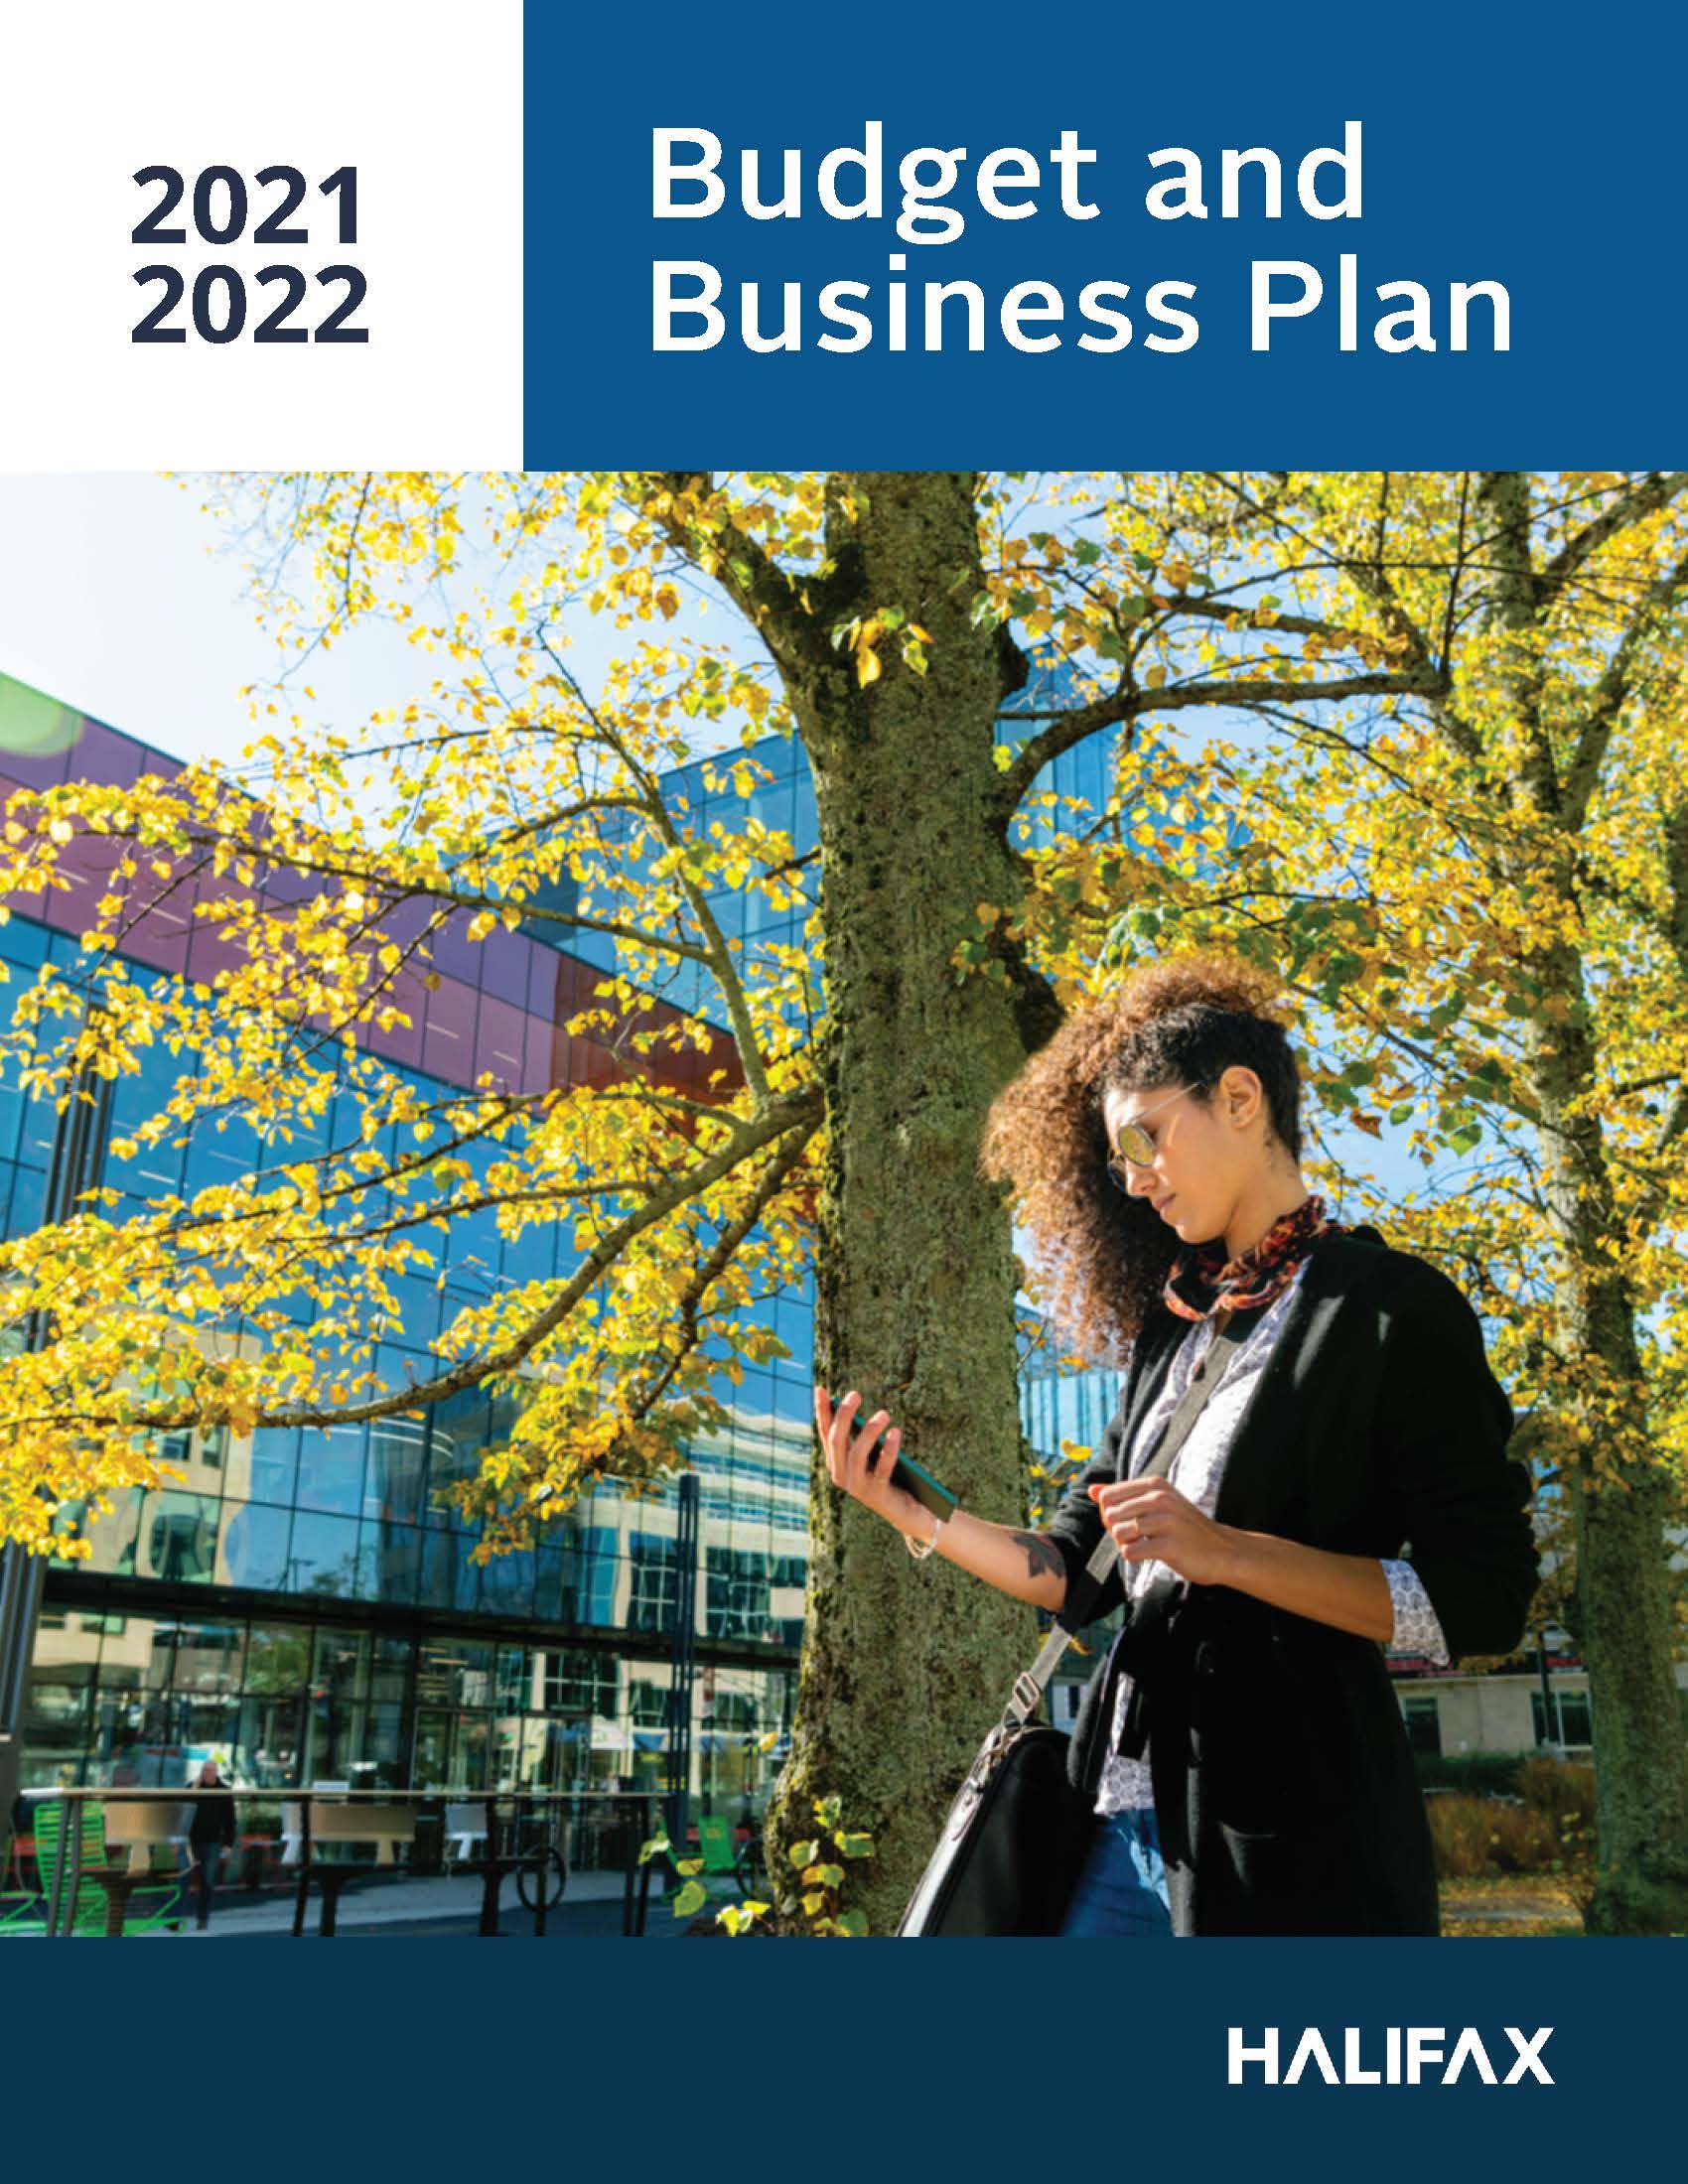 The cover page of the 2021/22 Budget and Business Plan document. The cover shows a woman standing in front of the Halifax Central Library. 